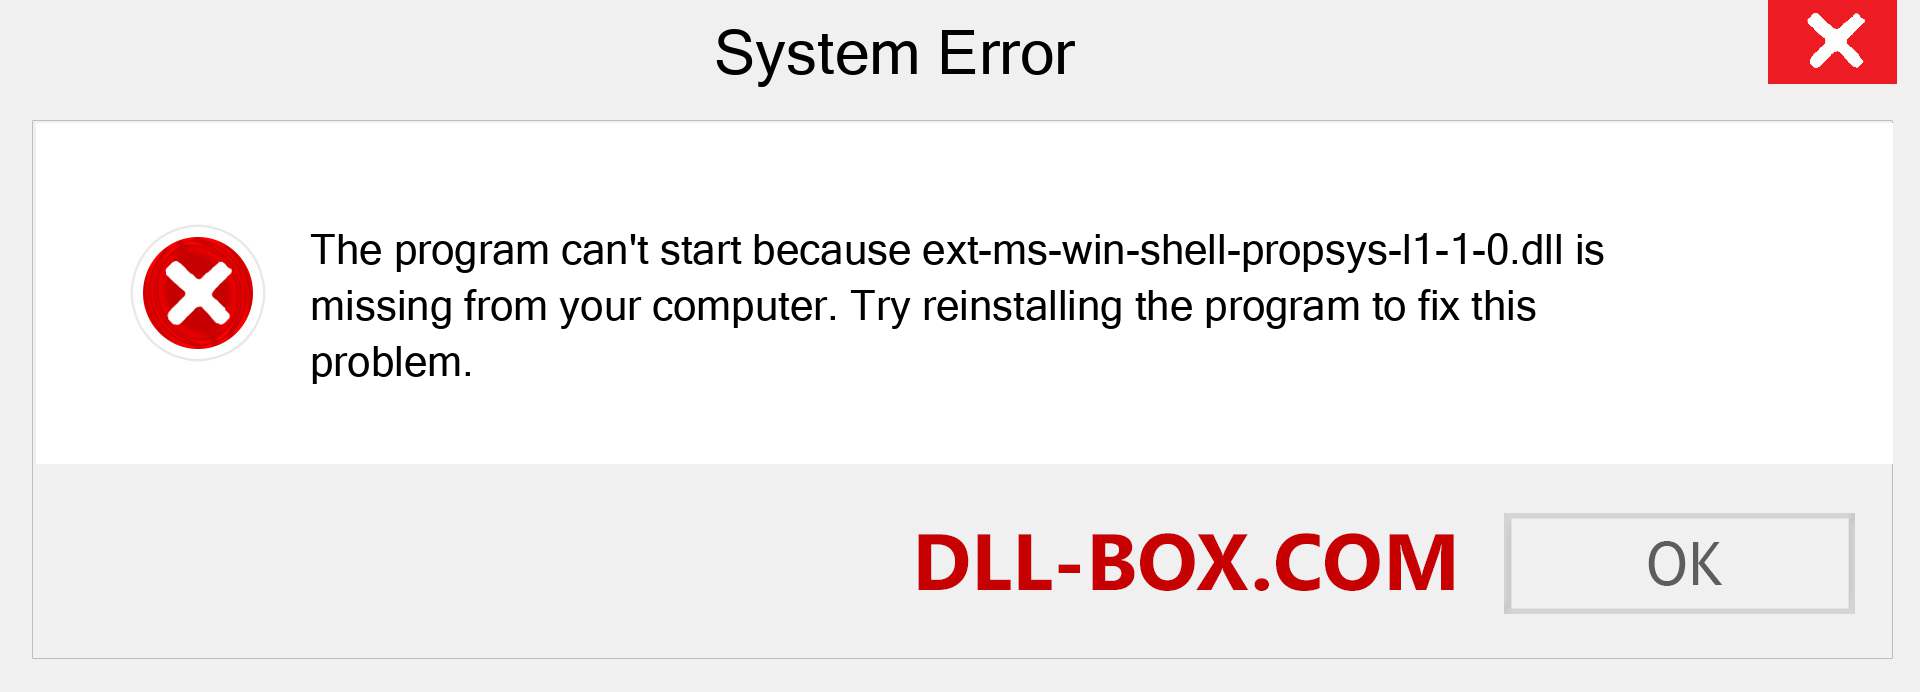  ext-ms-win-shell-propsys-l1-1-0.dll file is missing?. Download for Windows 7, 8, 10 - Fix  ext-ms-win-shell-propsys-l1-1-0 dll Missing Error on Windows, photos, images